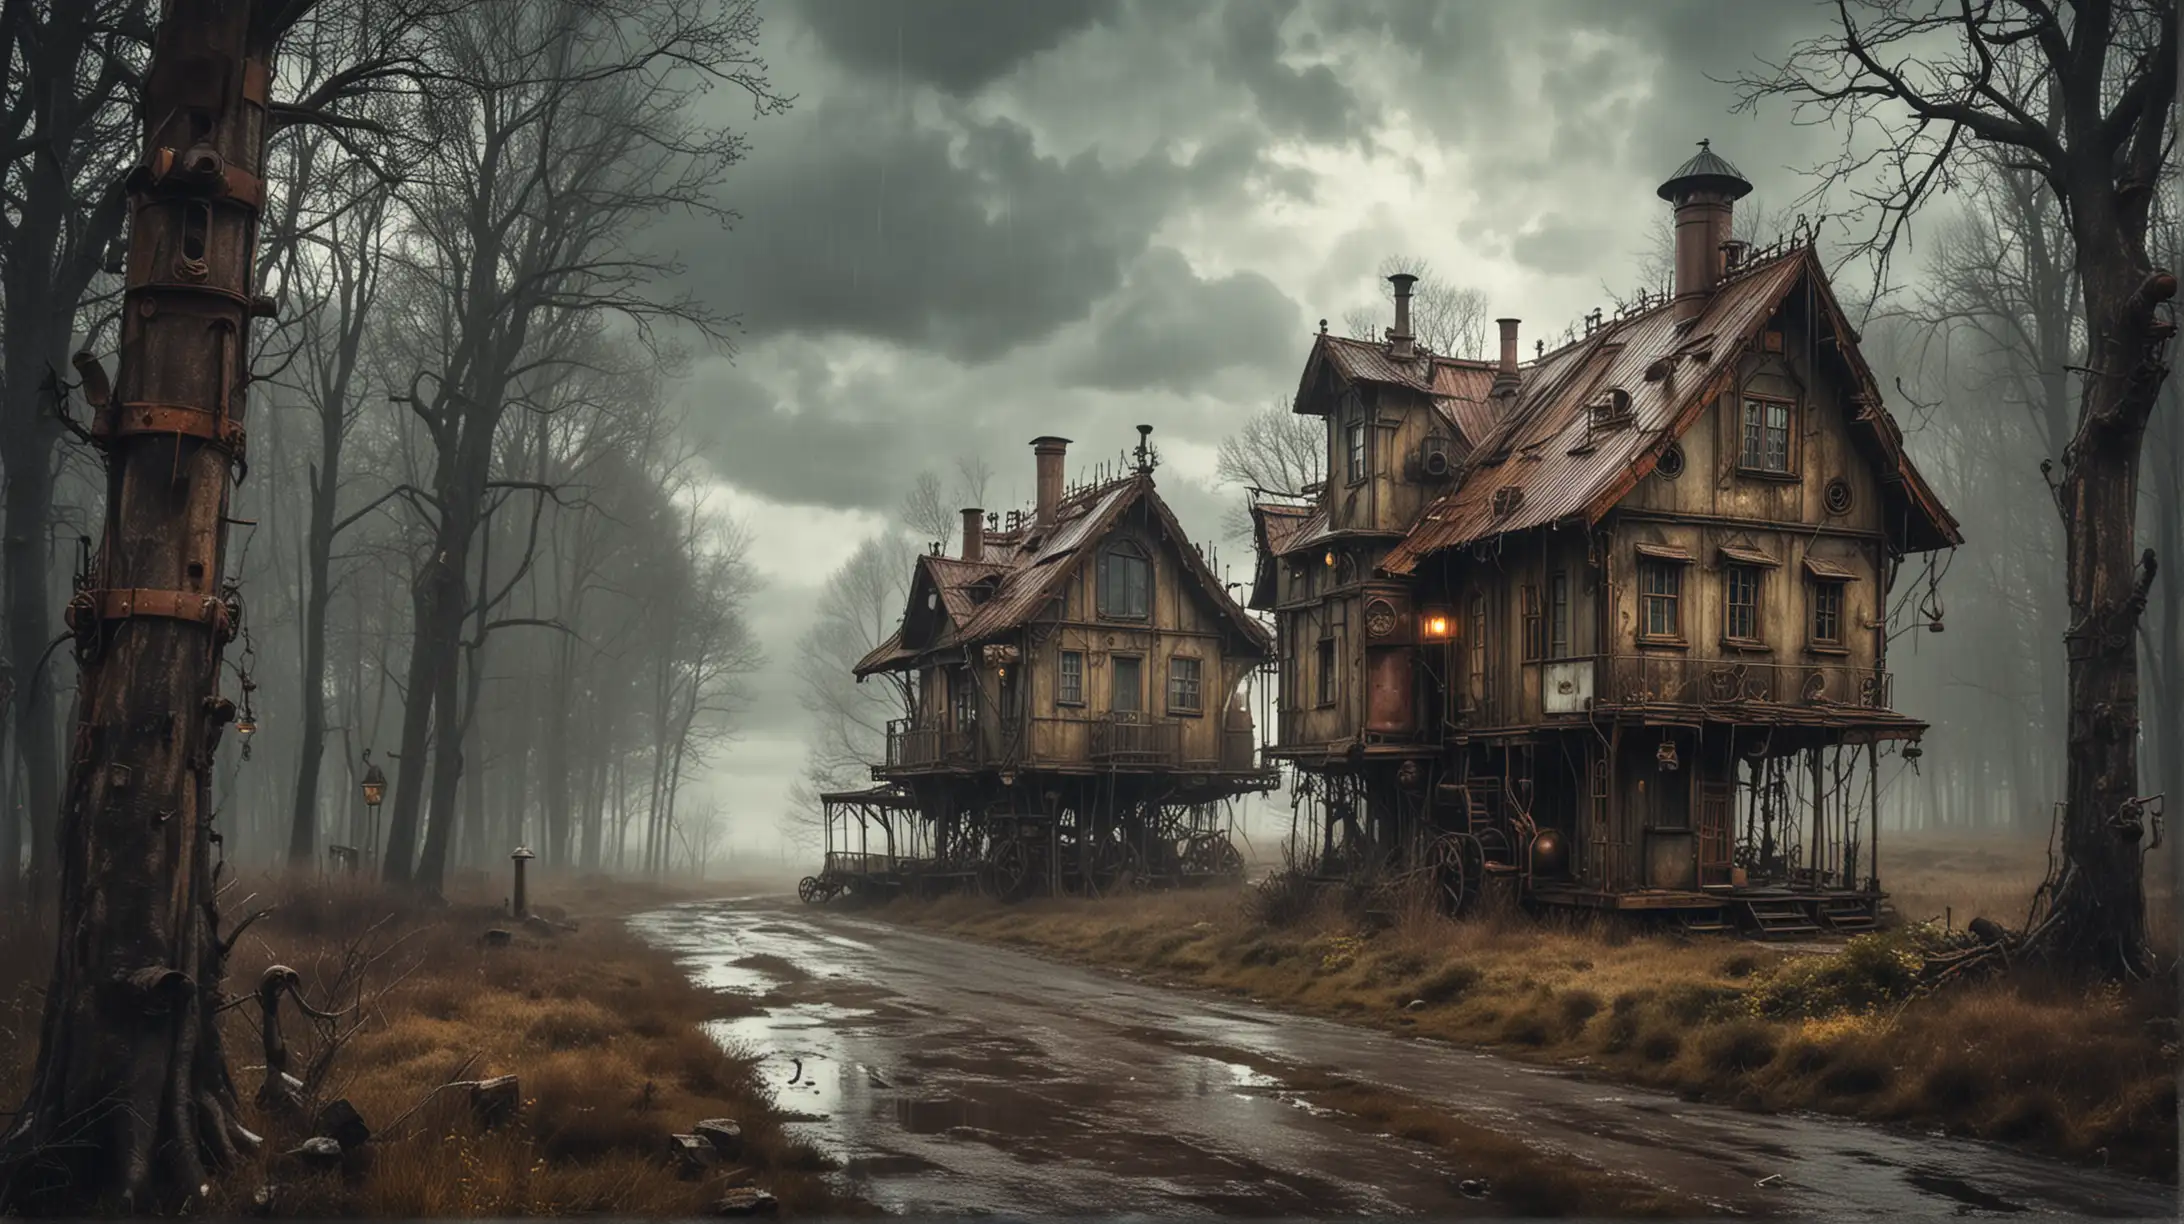 Vintage Steampunk Houses on Forest Edge Amid Stormy Weather